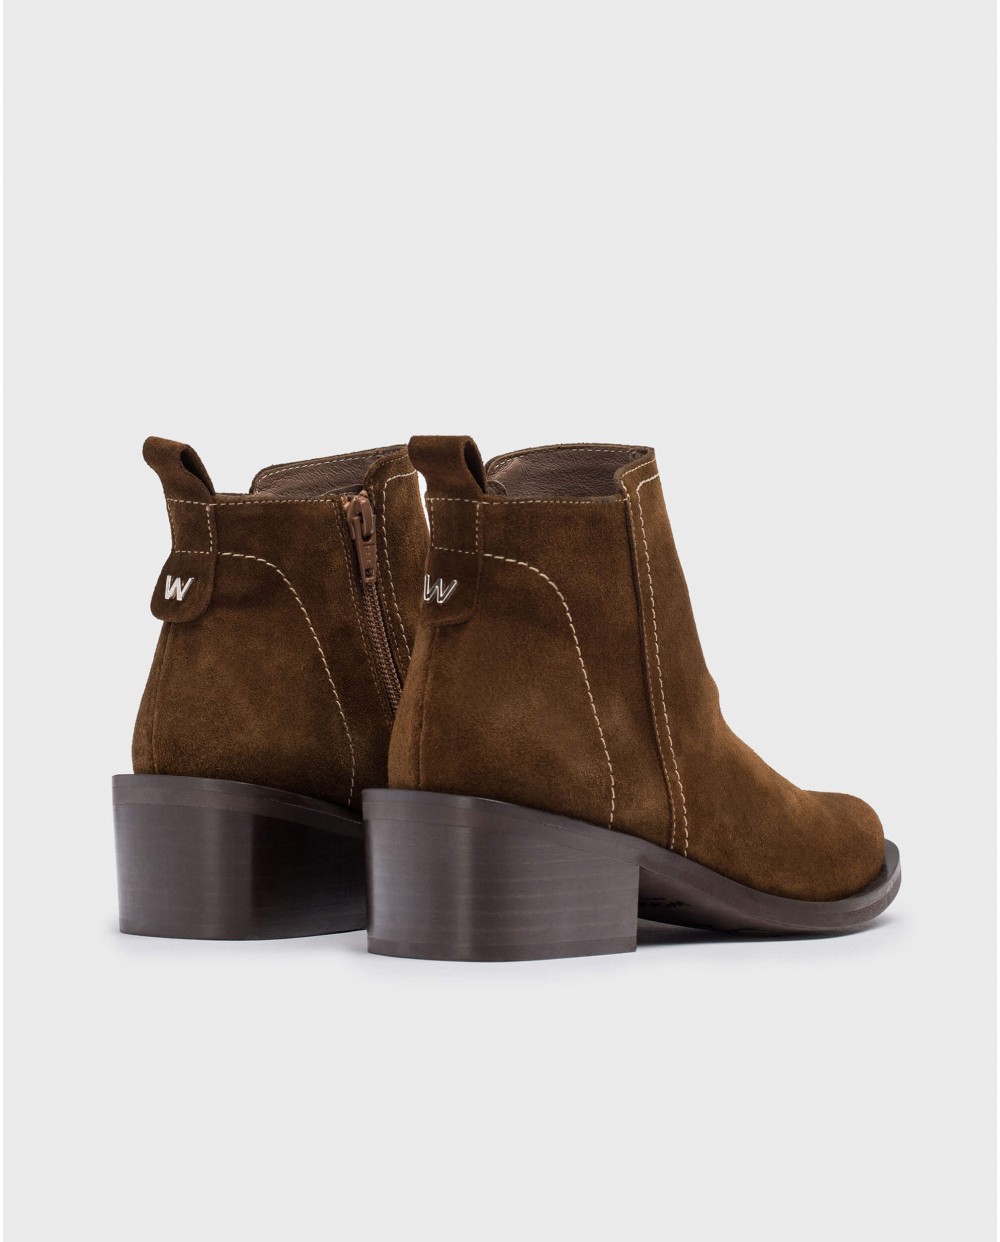 Wonders-Ankle Boots-Brown NOVA ankle boot